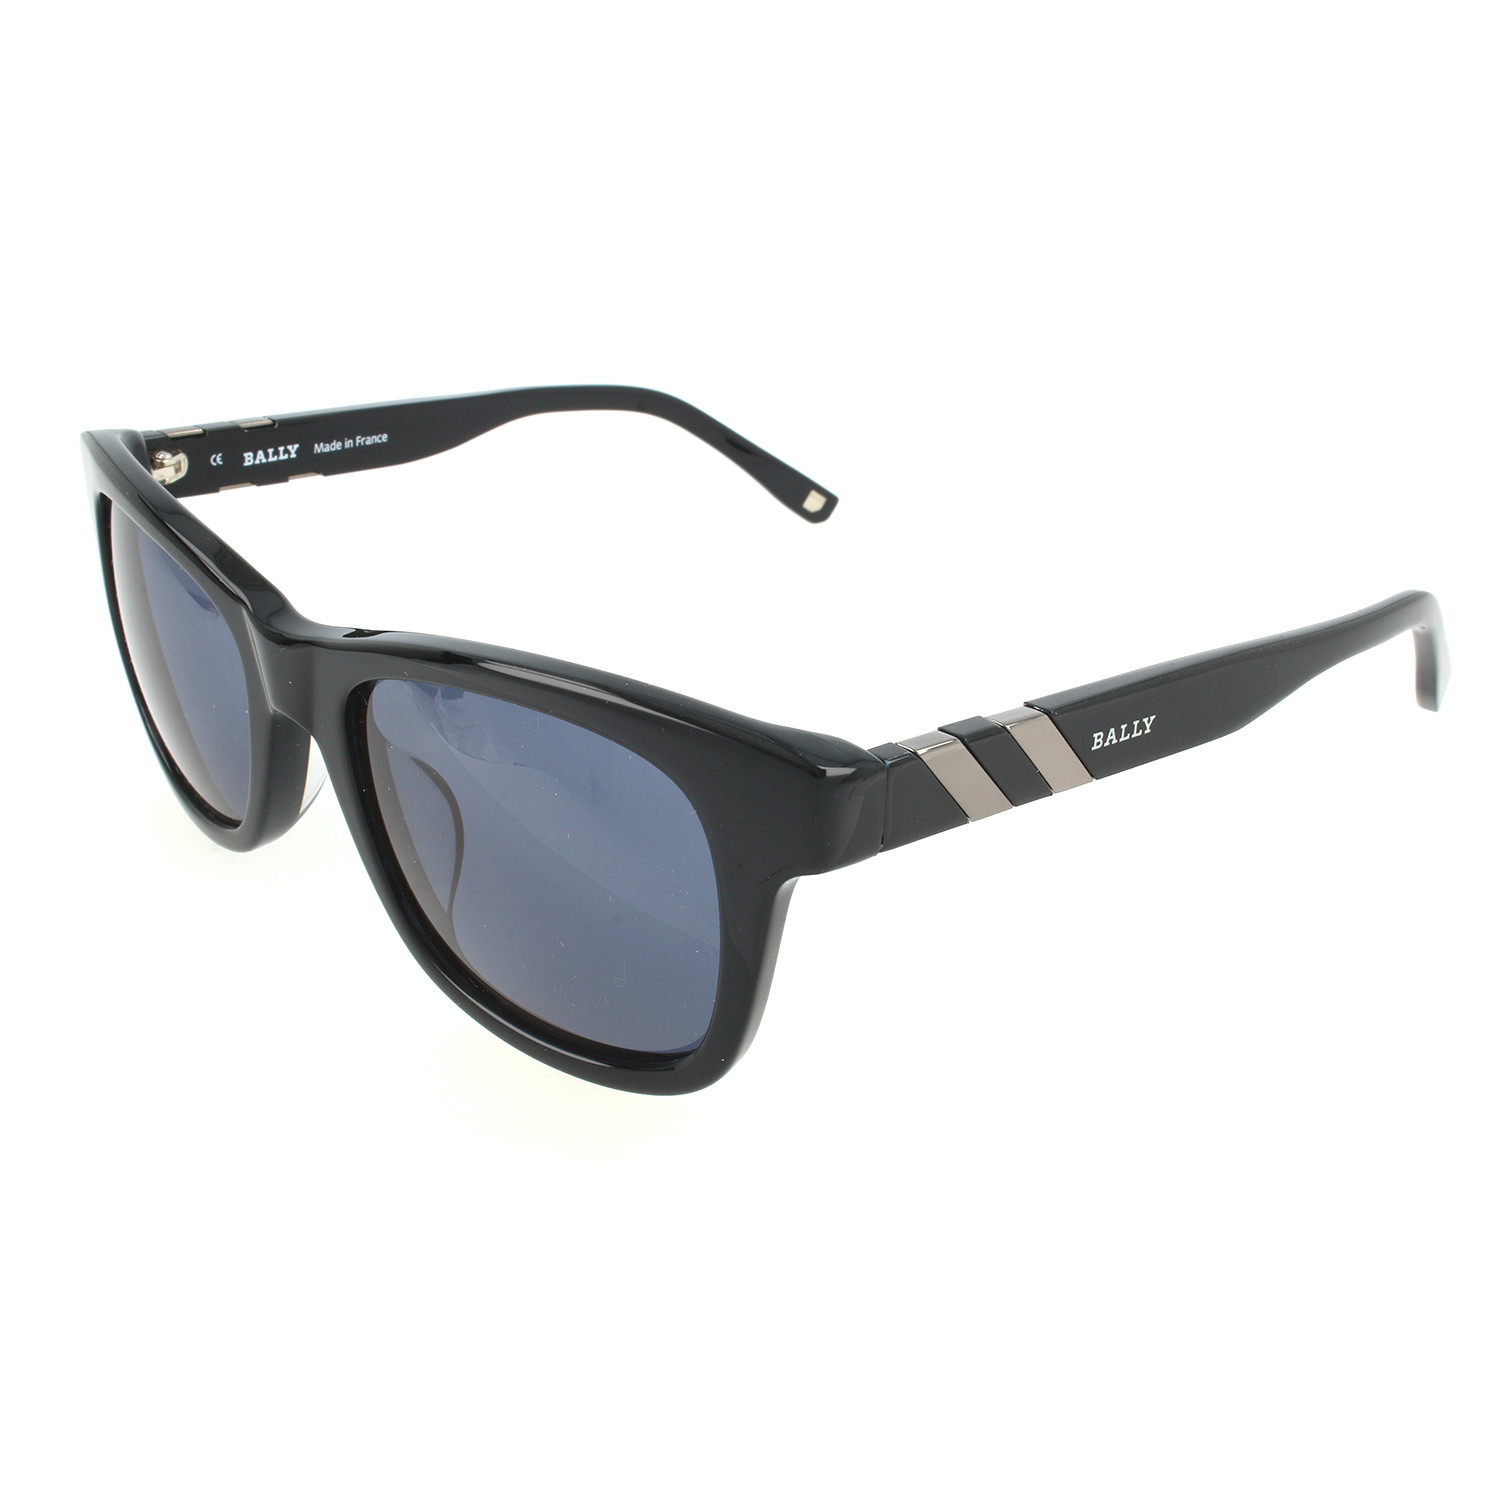 By4060a01 Men S Sunglasses Black Bally™ Touch Of Modern